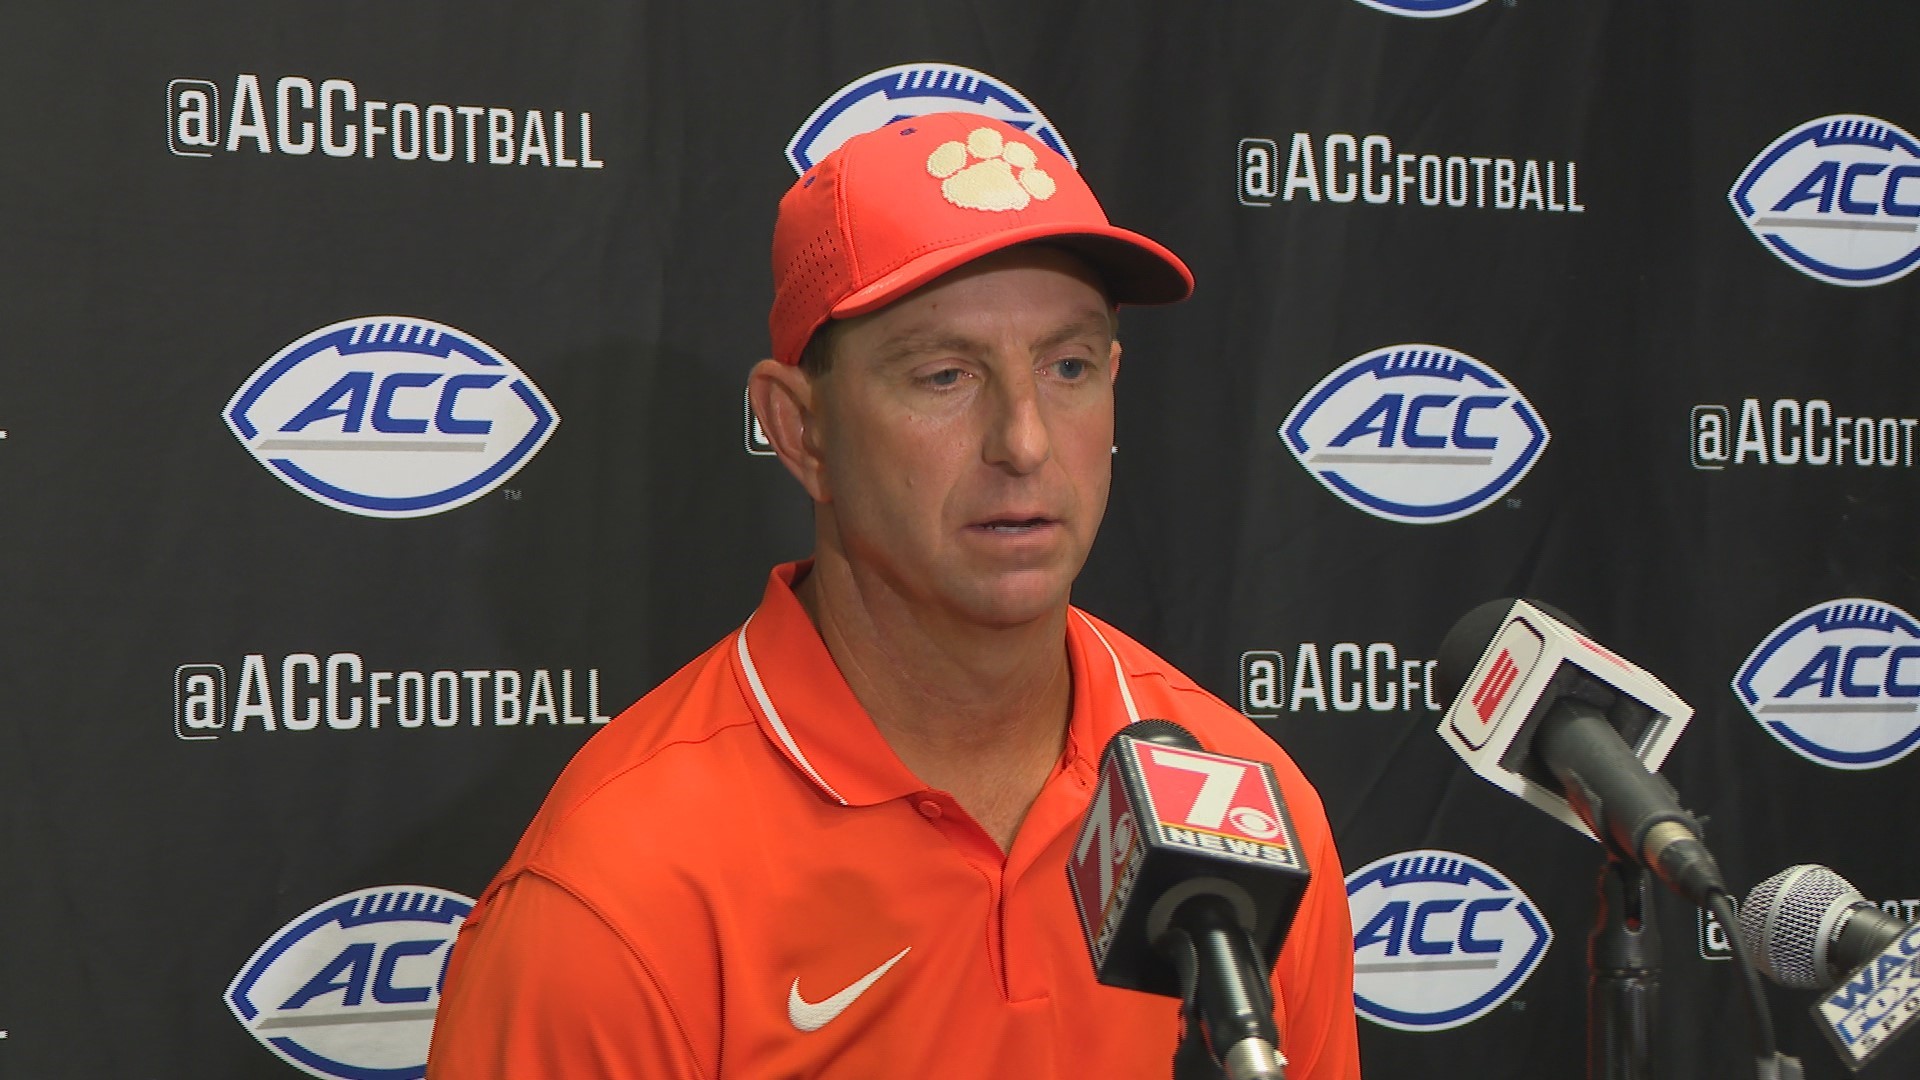 Clemson head football coach Dabo Swinney speaks to the media after his team suffered a 28-7 loss at Duke.